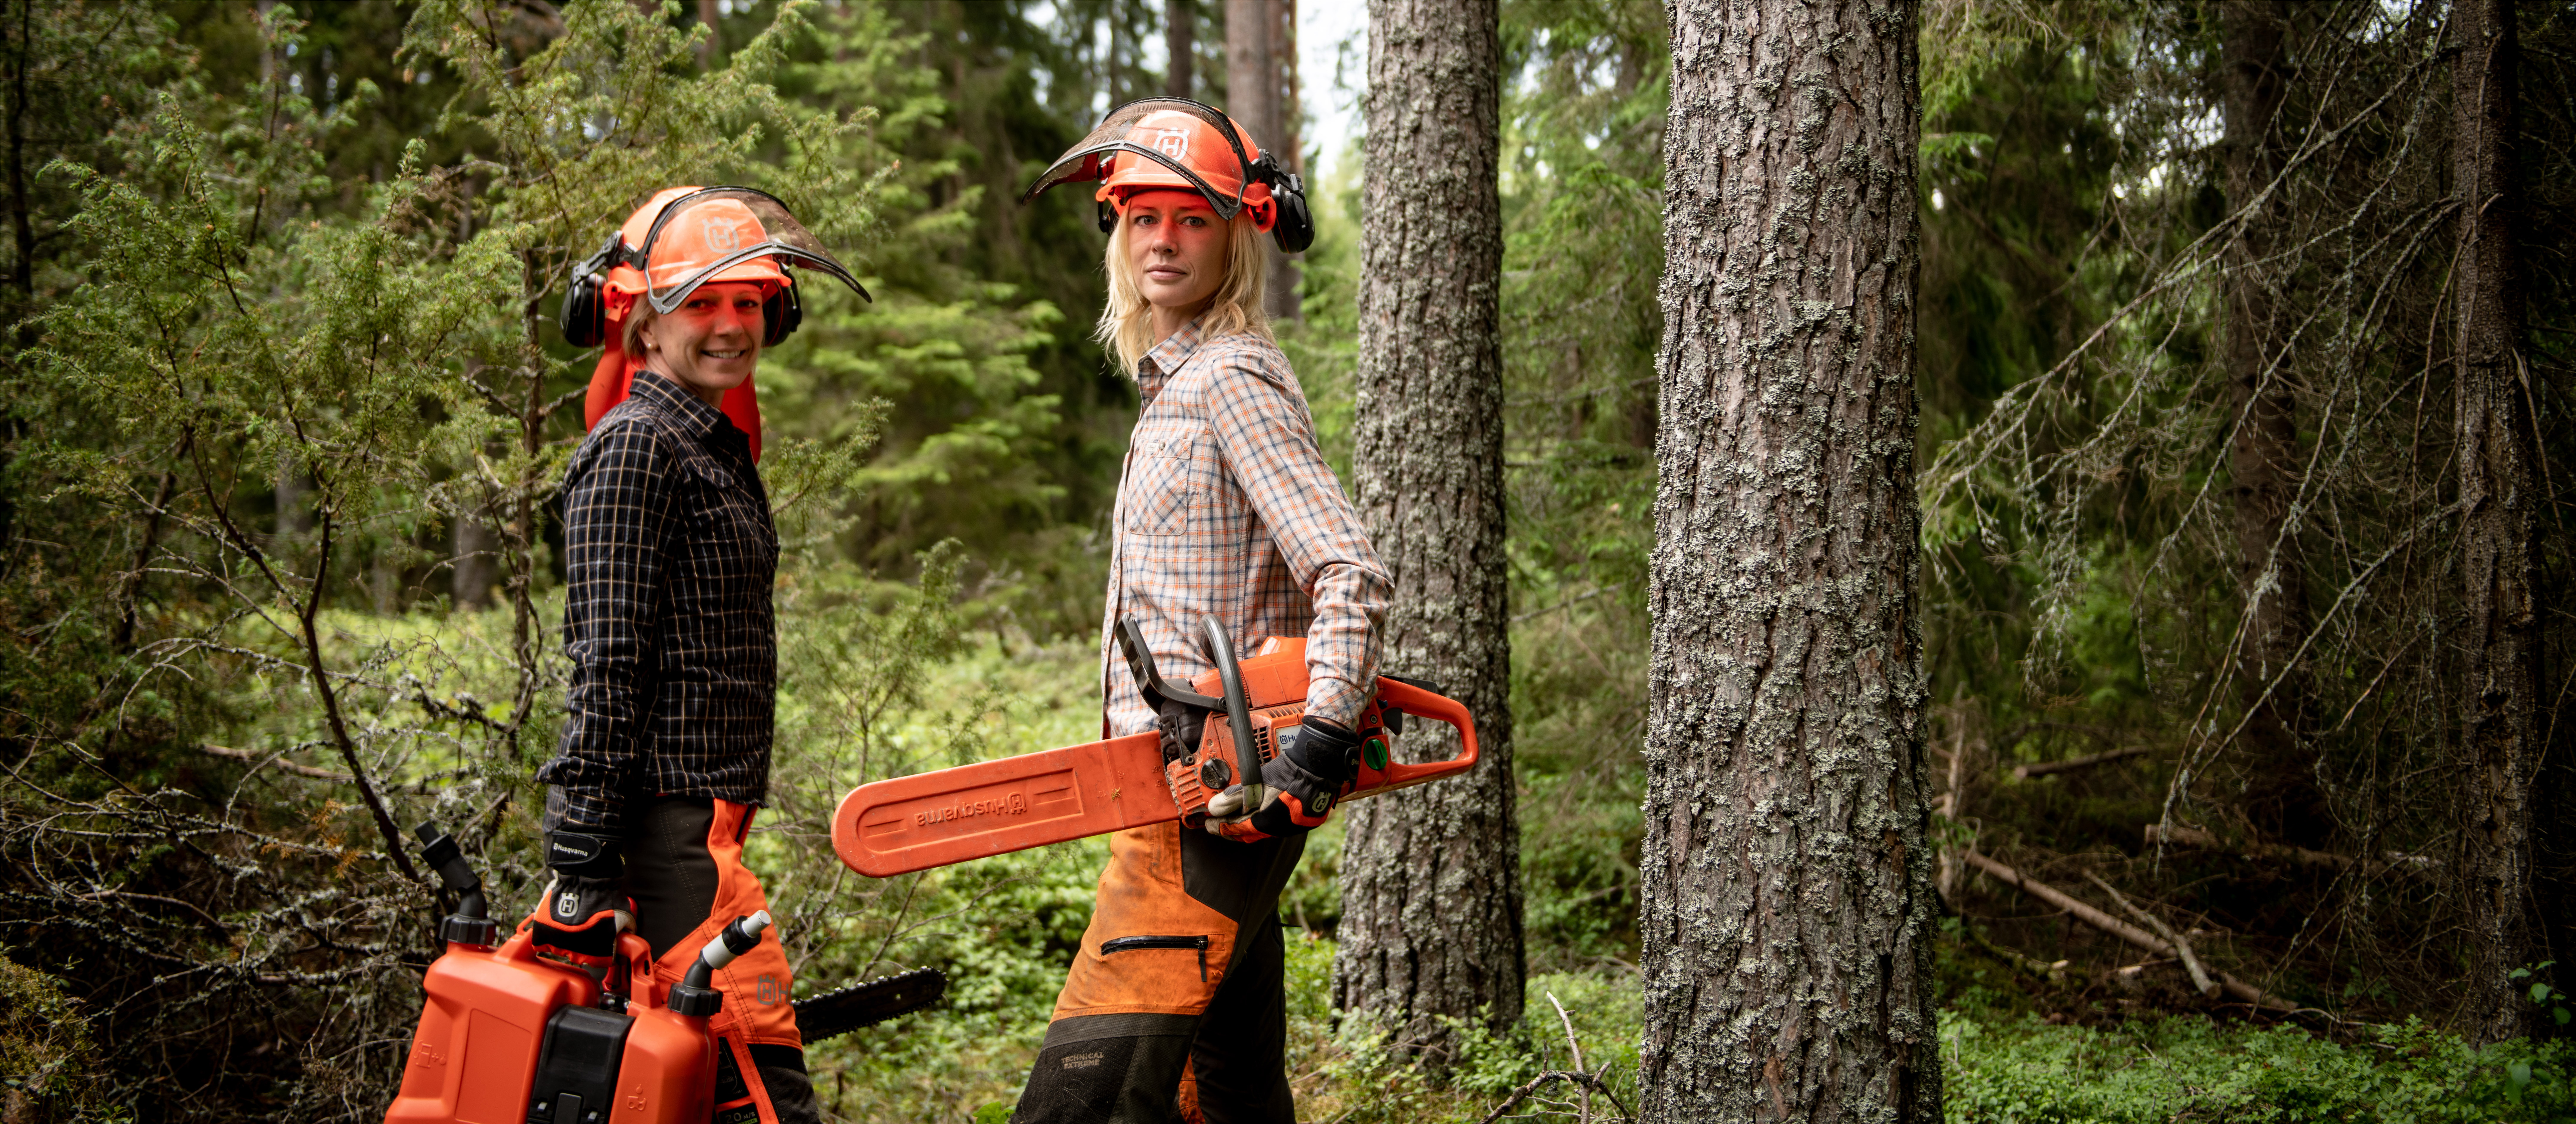 Two women standing in a forest carrying orange chainsaws